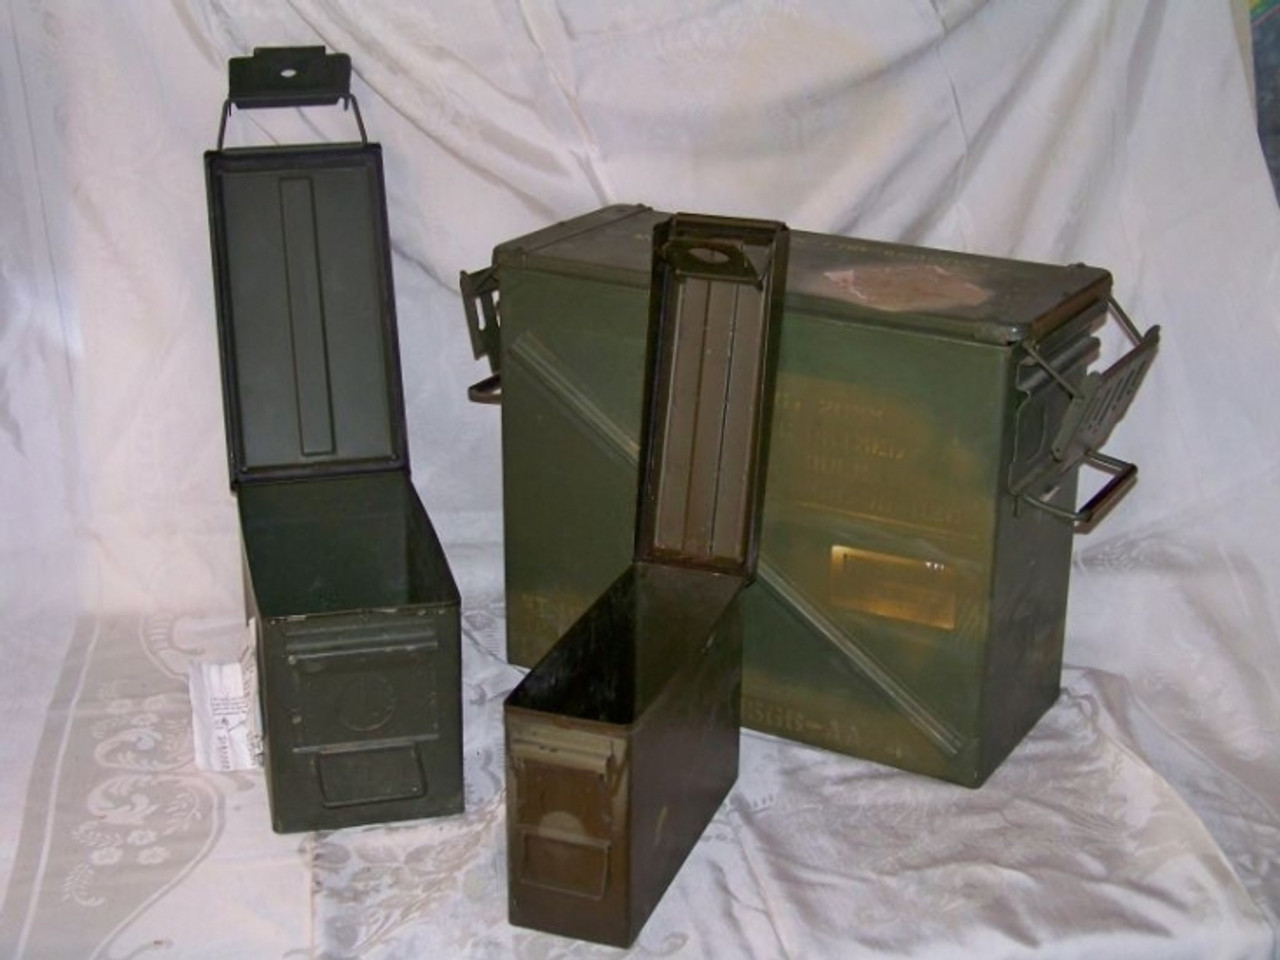 AMMO CANS & BOXES - Smith Army Surplus